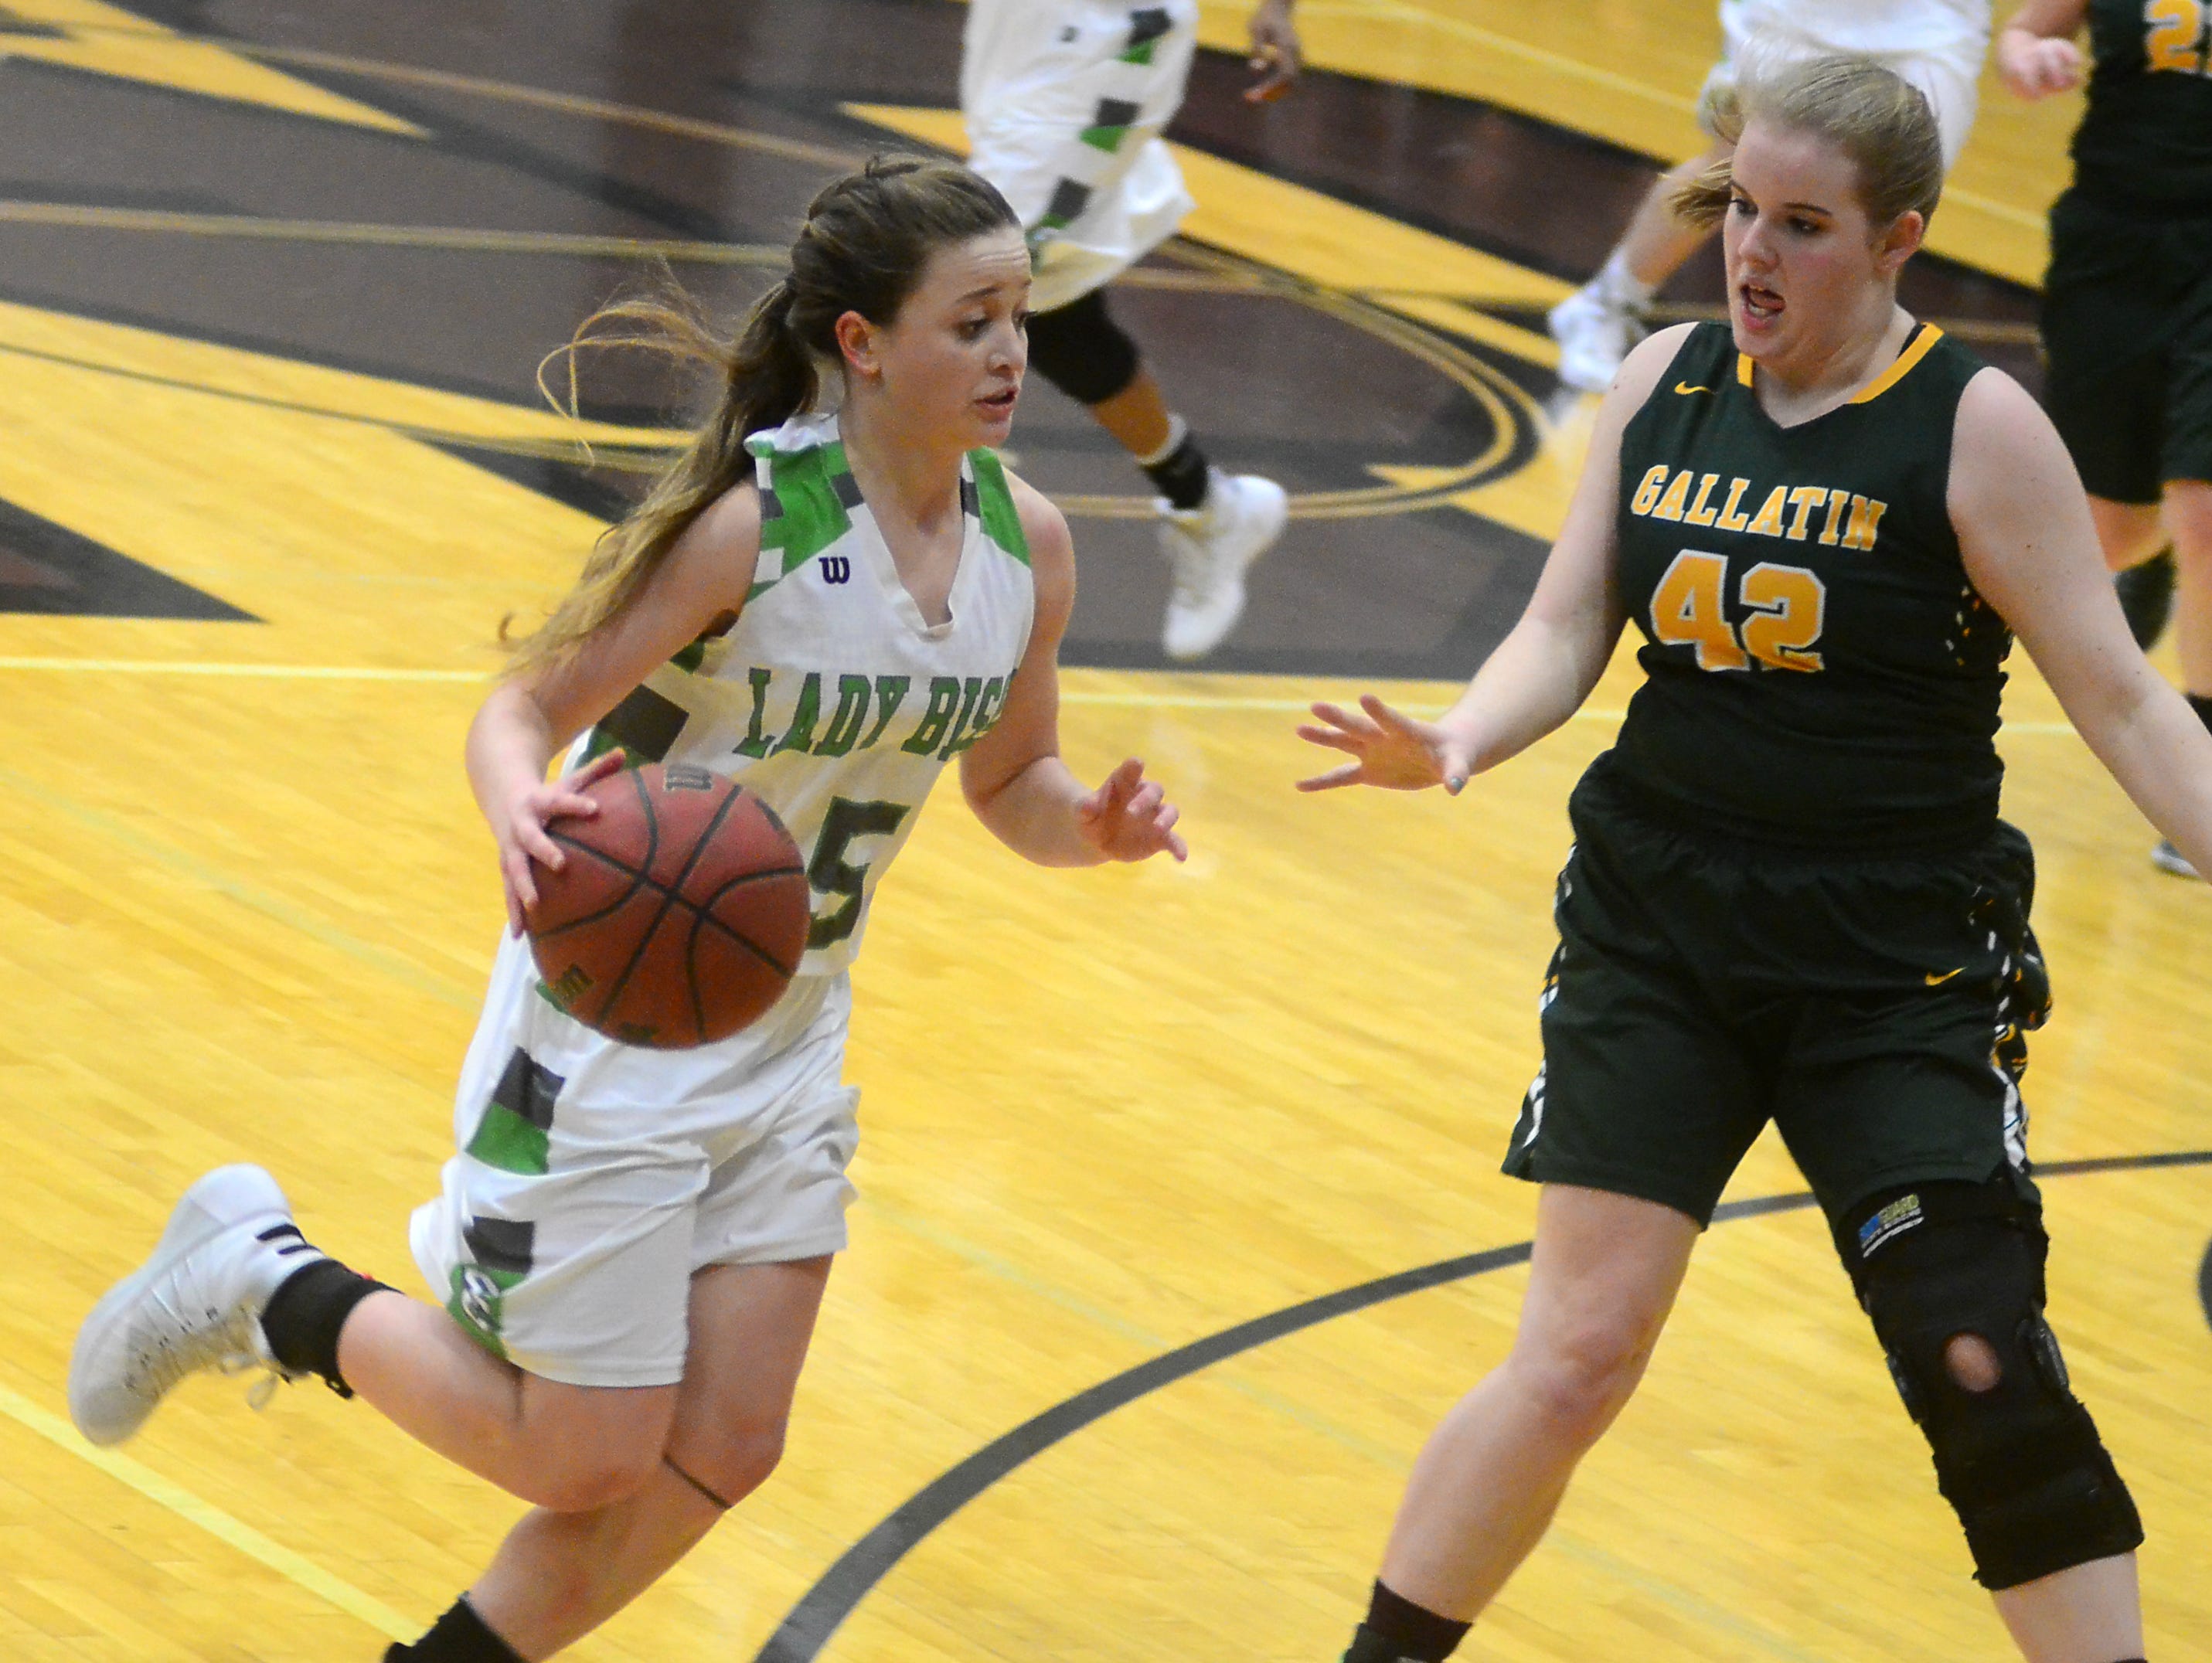 Station Camp High sophomore Cassidy Fry dribbles as Gallatin senior Keile Hale defends during third-quarter action. Fry scored five points.